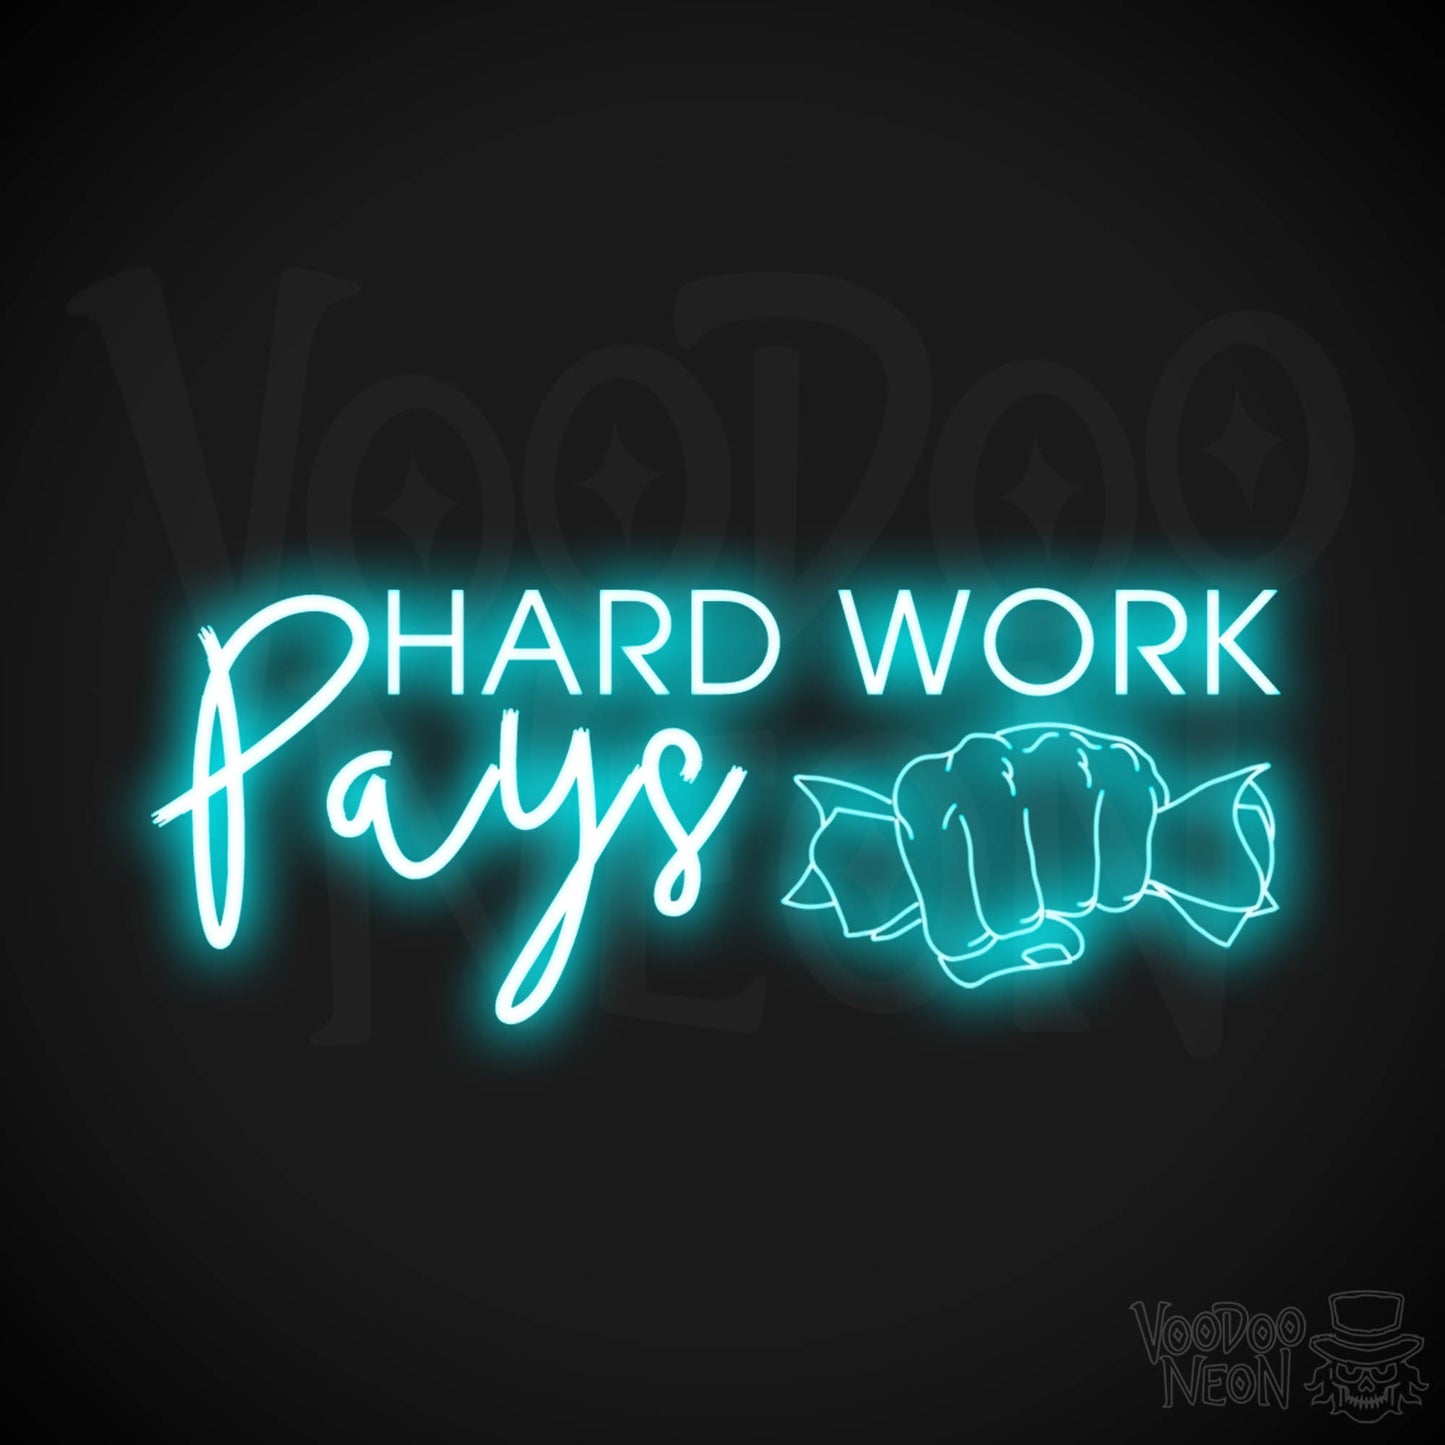 Hard Work Pays Neon Sign - LED Neon Wall Art - Color Ice Blue